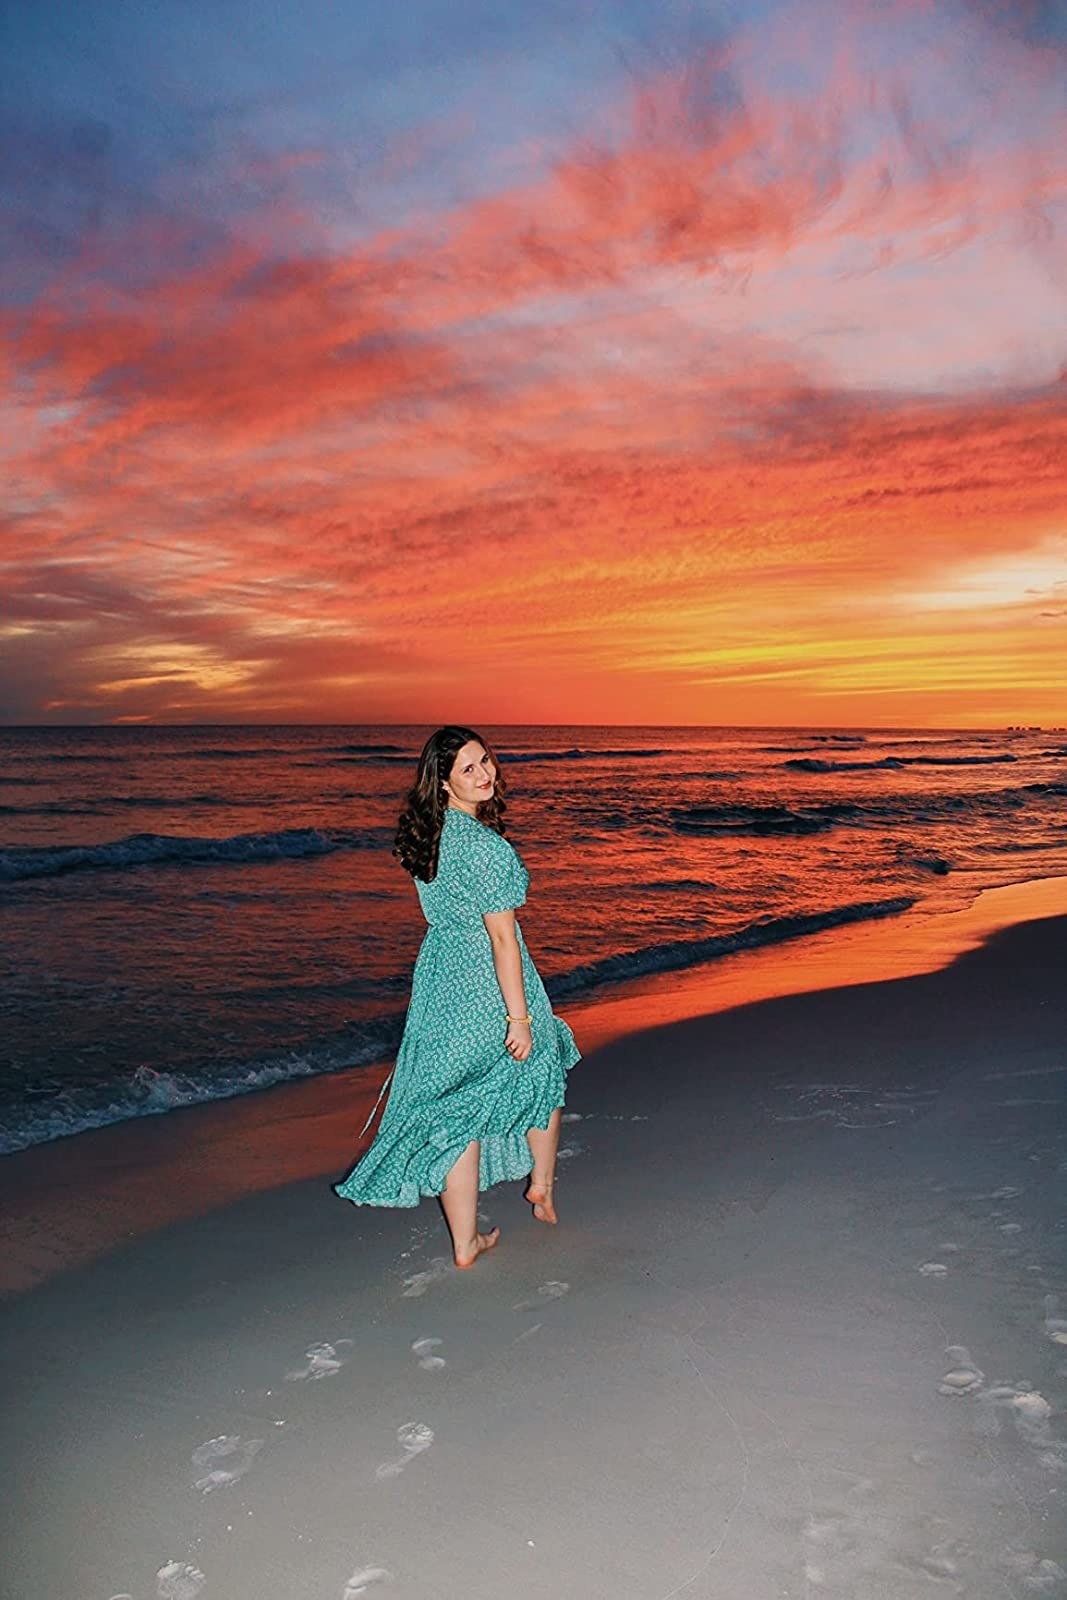 Reviewer on beach at sunset in teal polka-dot dress